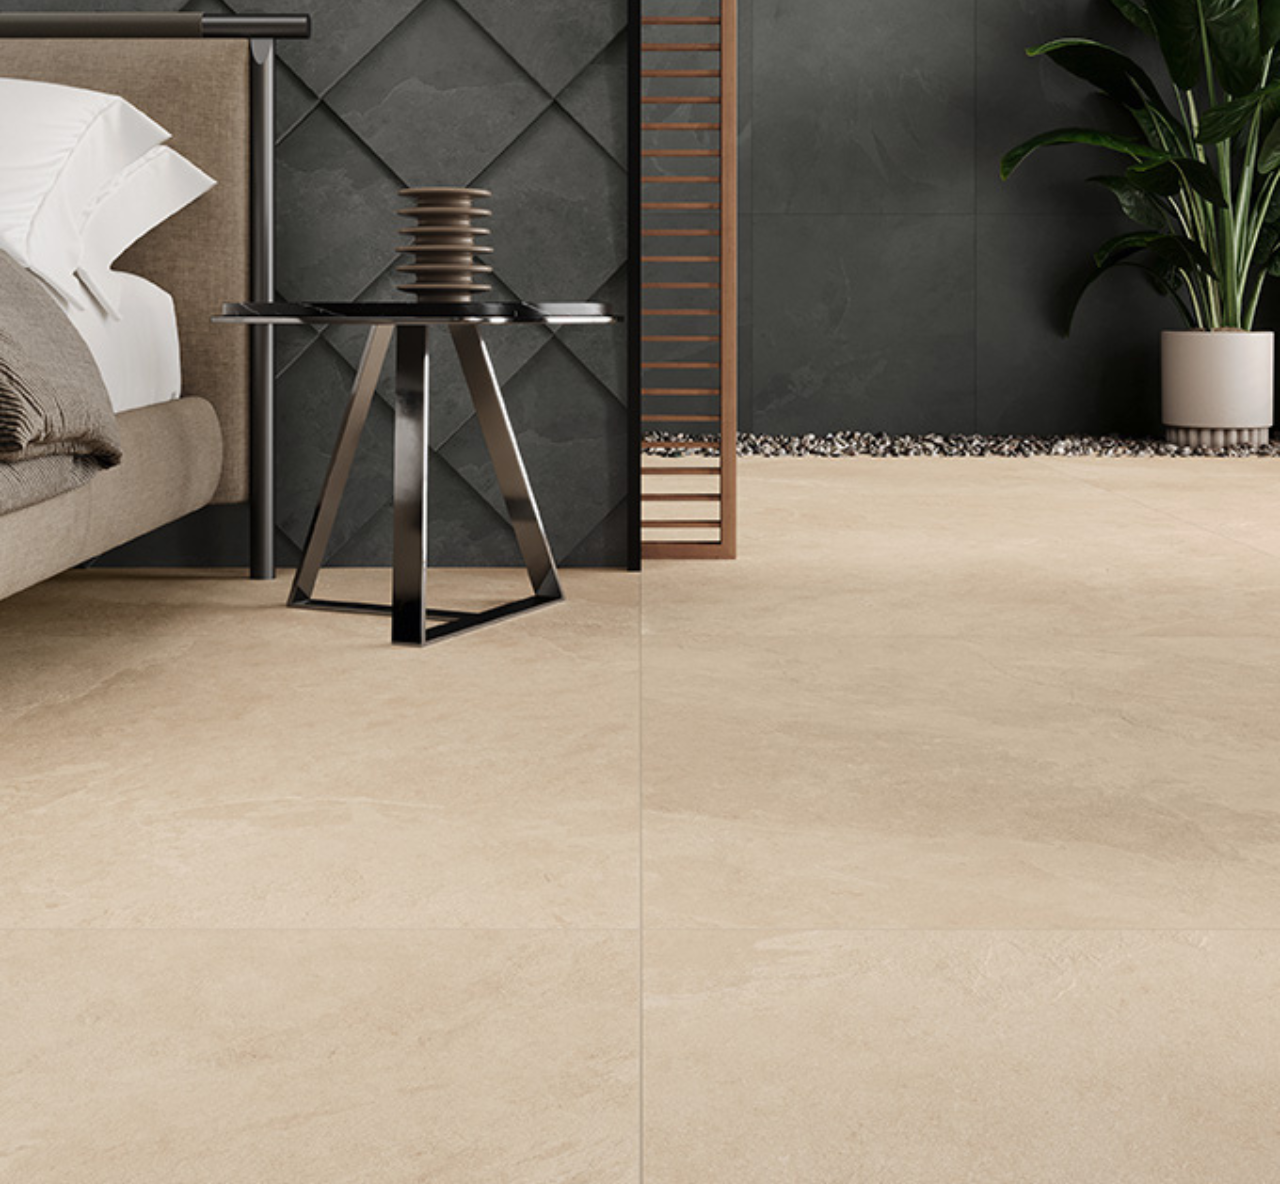 Fossil Khaki warm beige stone effect tiles used on the floor in a bedroom